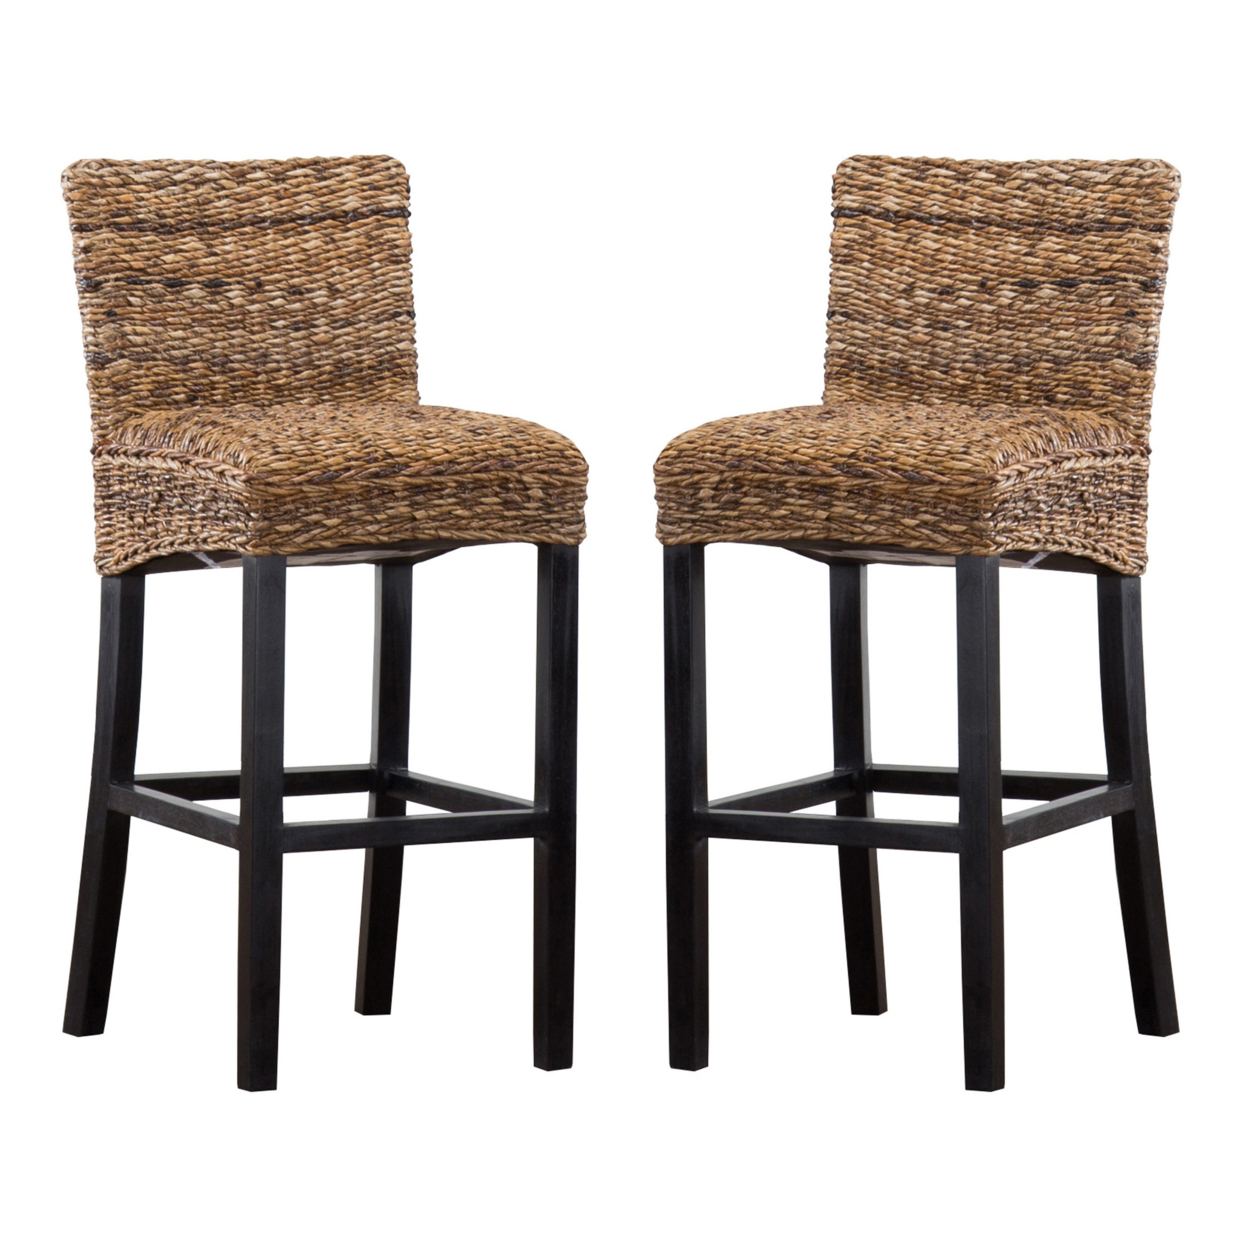 Woven Rattan Barstool With Wooden Legs, Low Profile Backrest, Set Of 2, Brown And Black- Saltoro Sherpi